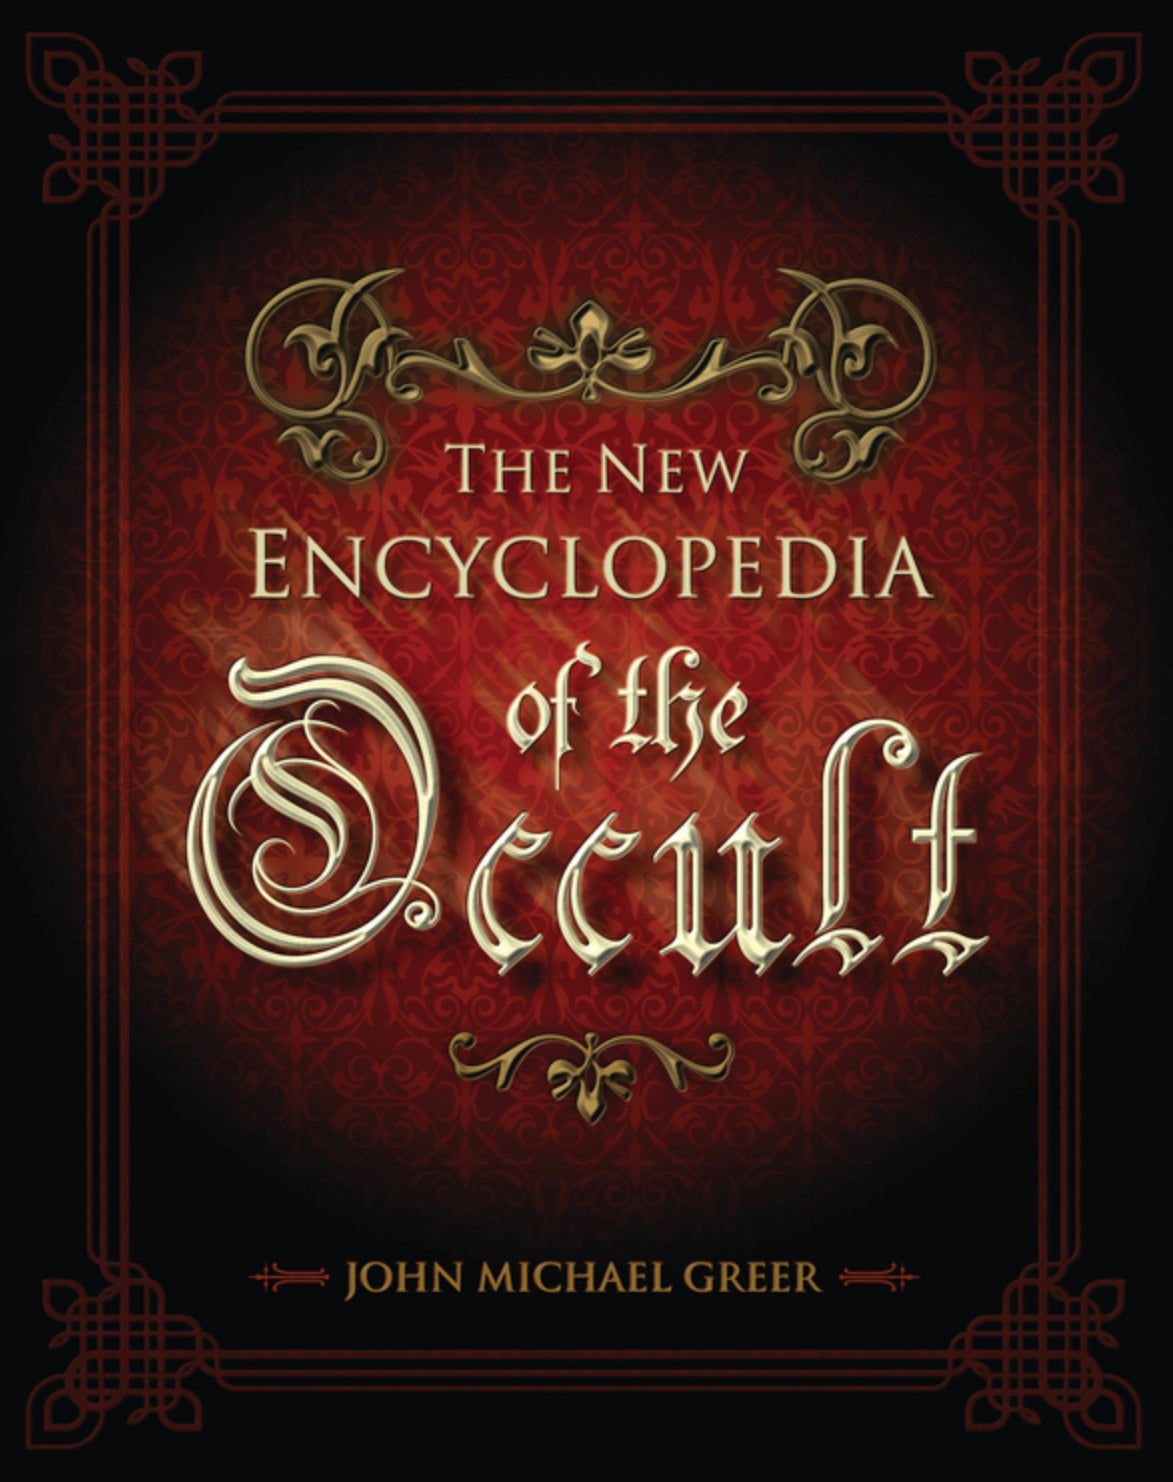 encyclopedia of the occult by John Michael Greer